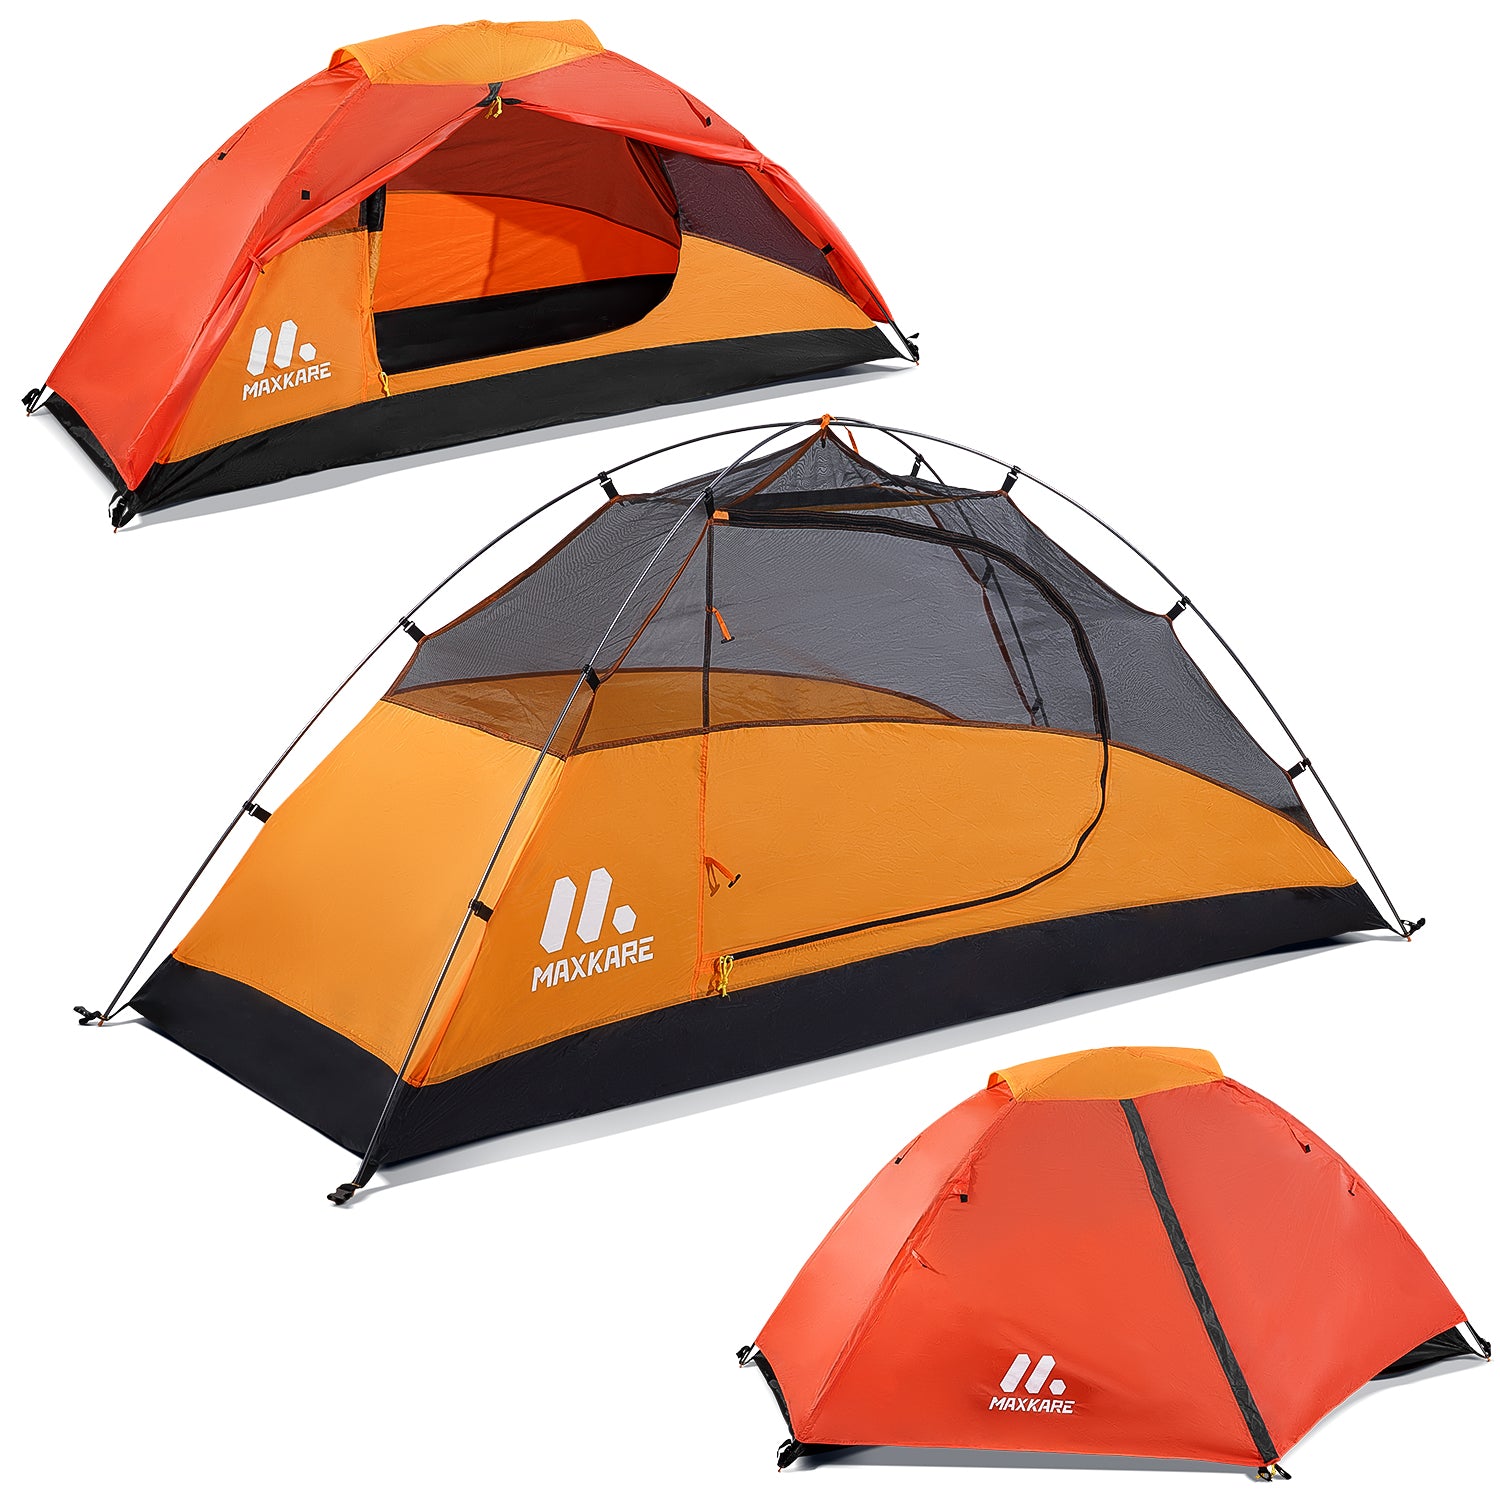 Load image into Gallery viewer, Backpacking Tent Hiking Tent 1-Person Camping Tent for Camping Travel Hiking Mountaineering Outdoor, Ultralight, Waterproof, Easy Set Up with Rainfly, Wind Ropes, Storage Bag - Orange &amp; Yellow
